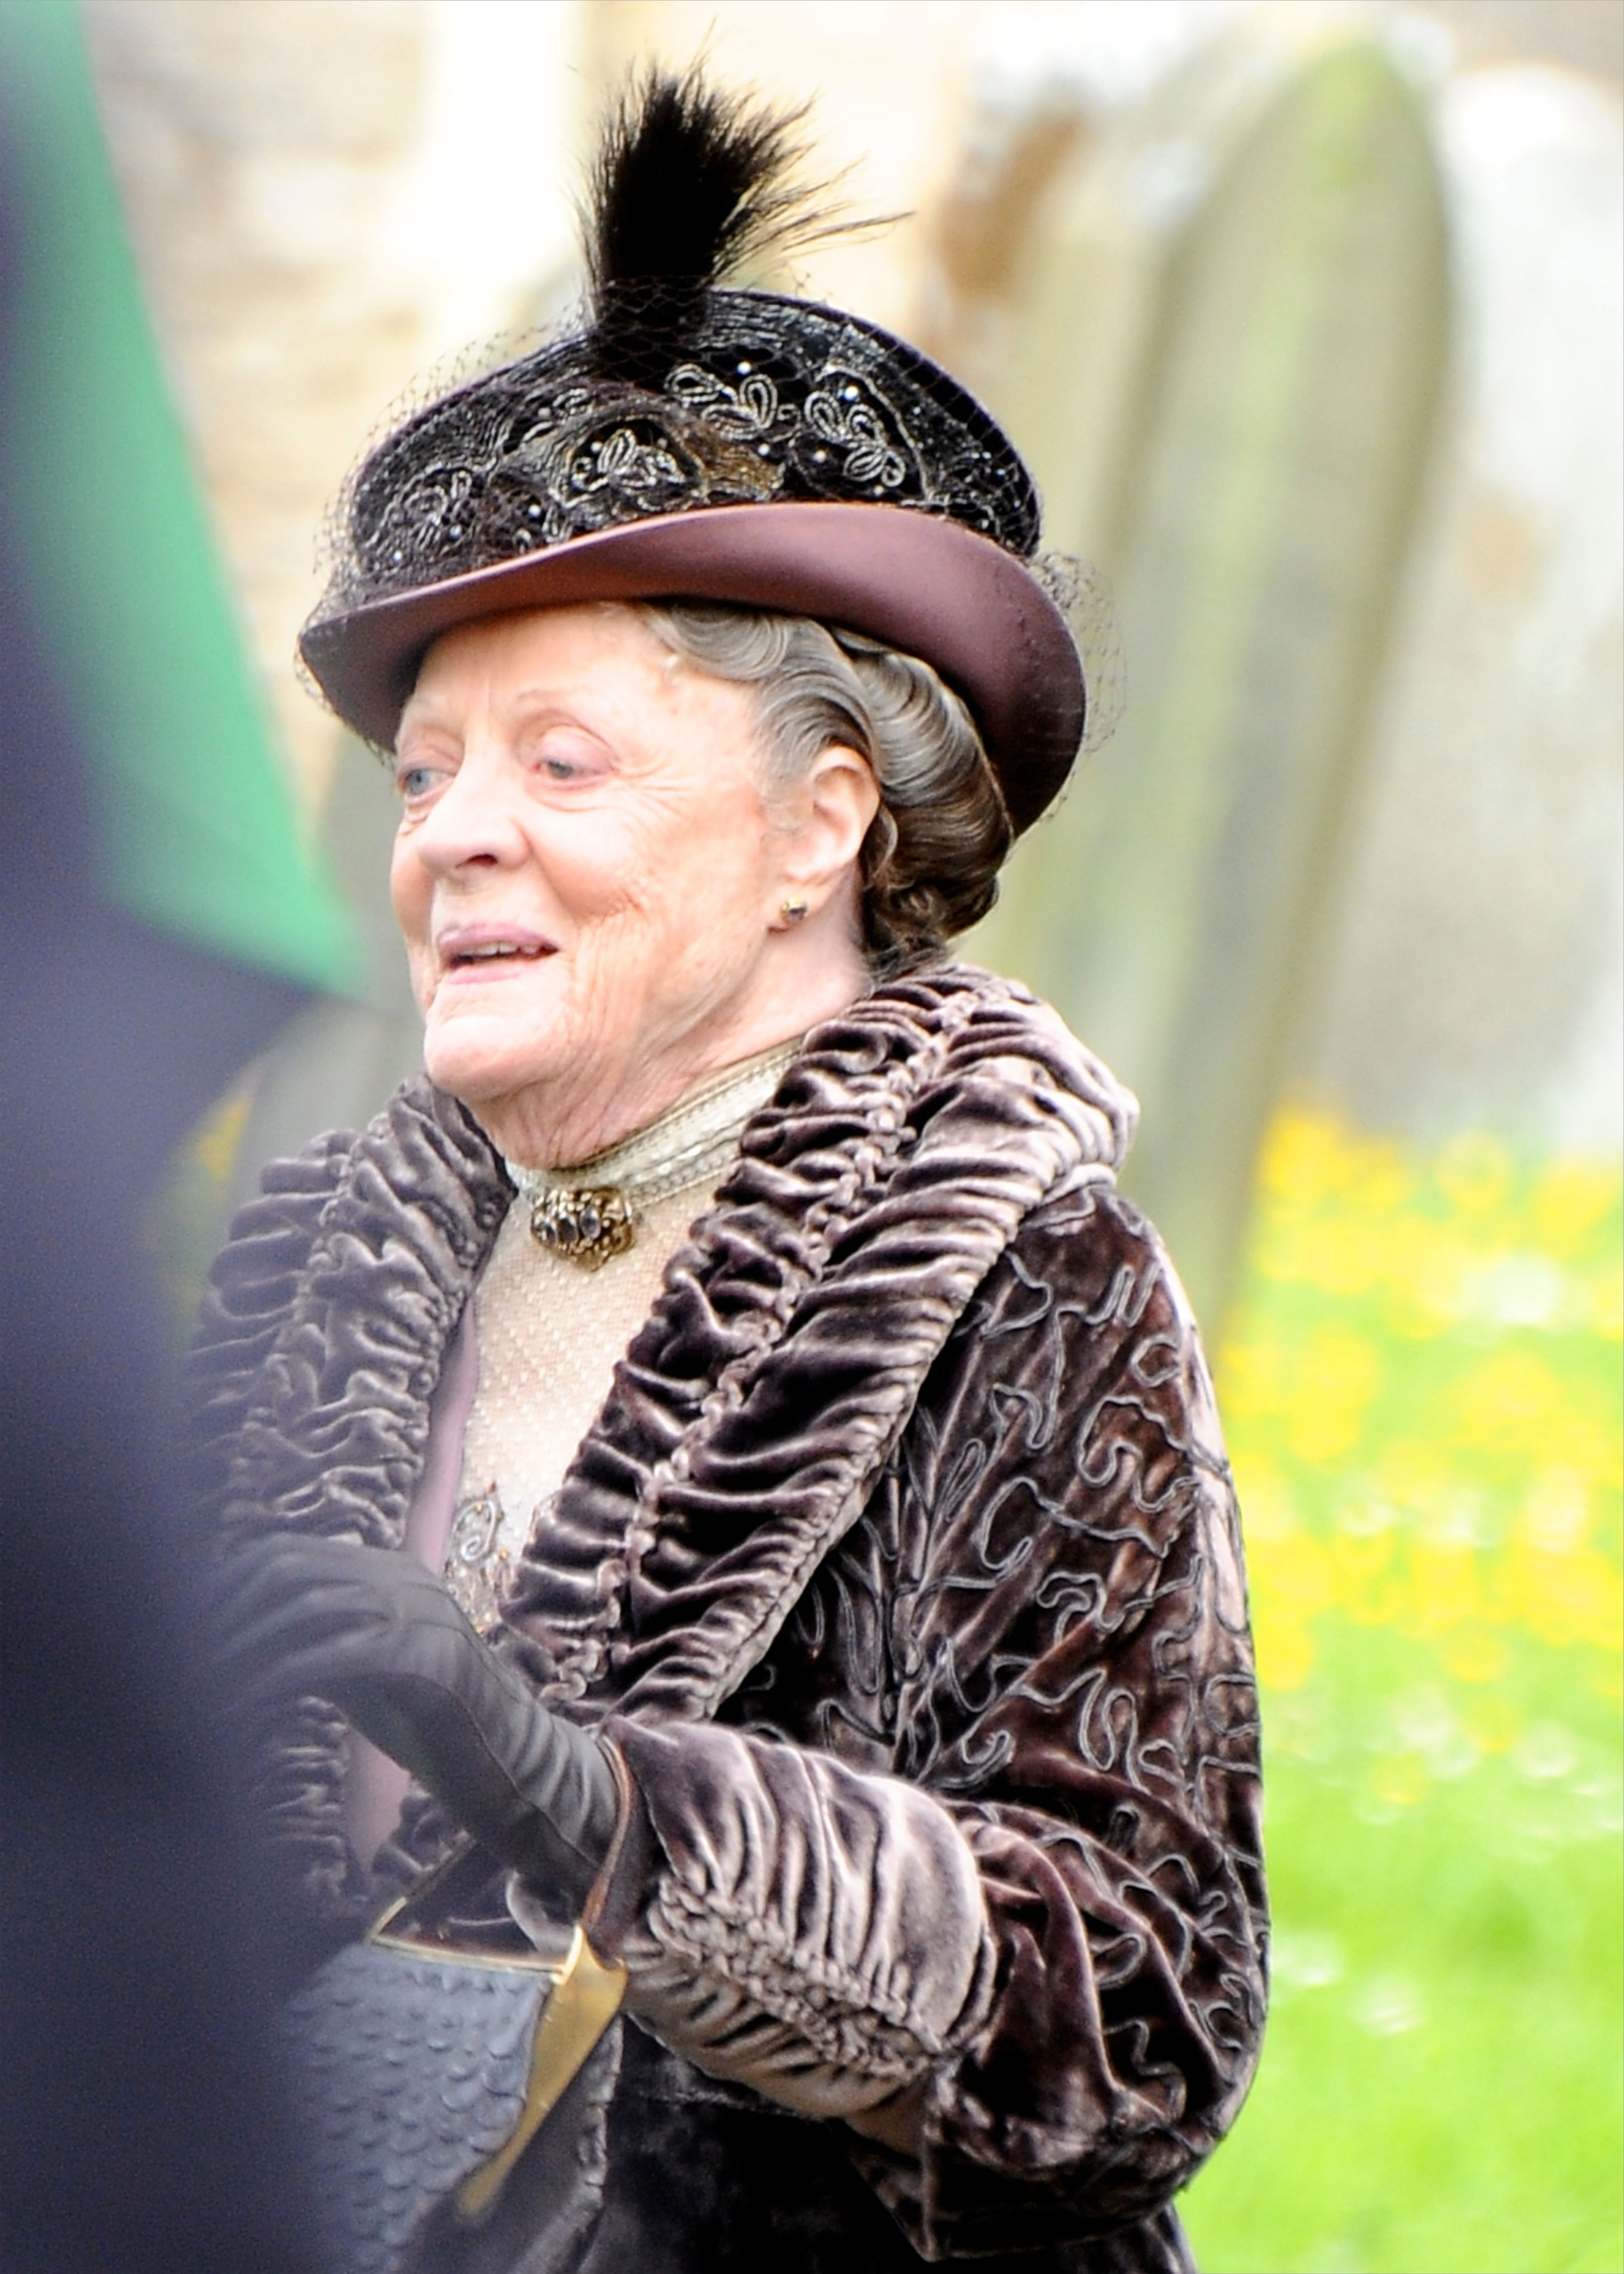 <p>Here's a closer look at the detail on one of the hats and jackets that Maggie Smith (as the Dowager Countess of Grantham) wore while shooting "Downton Abbey" in 2013. Although costume designer Anna Mary Scott Robbins didn't join the production until season 5, she still has some strong thoughts about the older aristocrat's wardrobe. "Lady Violet will be corseted until the end of time," she told <a href="https://www.vogue.co.uk/article/downton-abbey-film-costumes-anna-jones-interview">Vogue</a>. "She's always going to have an Edwardian silhouette."</p>